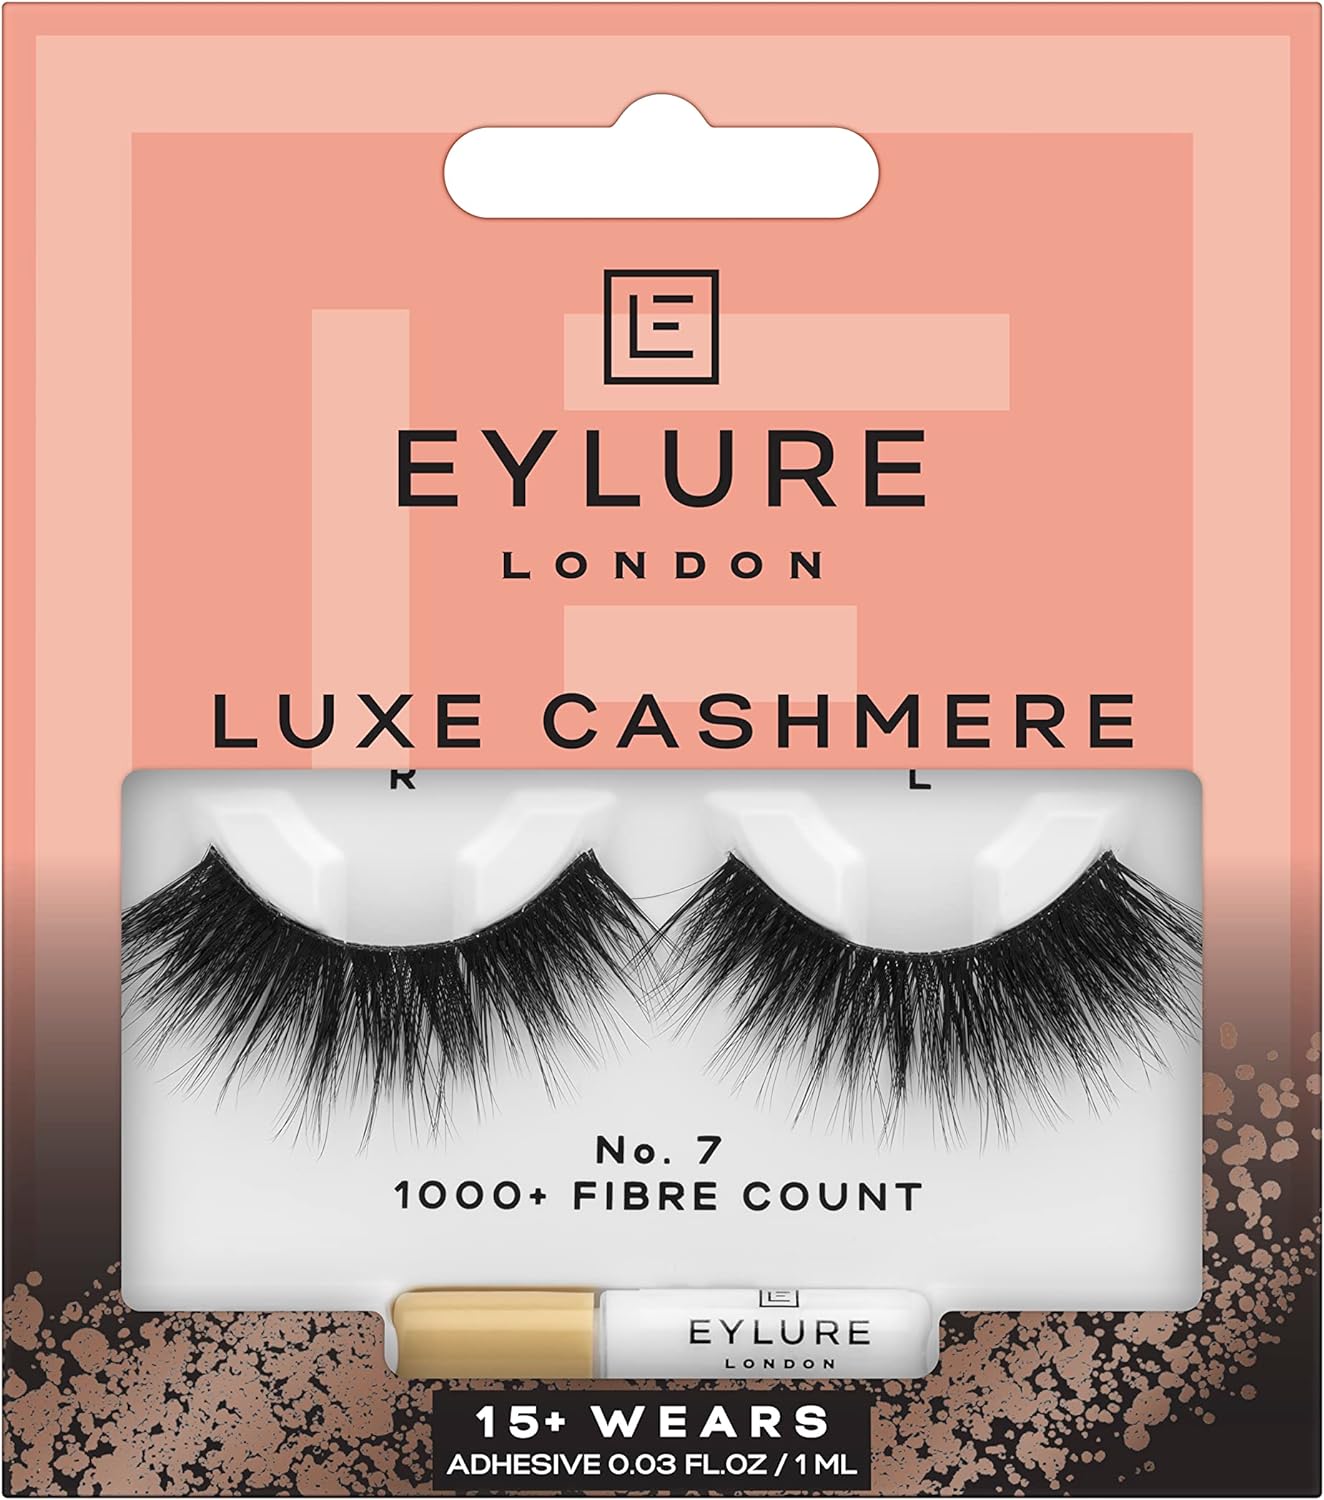 Eylure Luxe Cashmere Lashes No 7